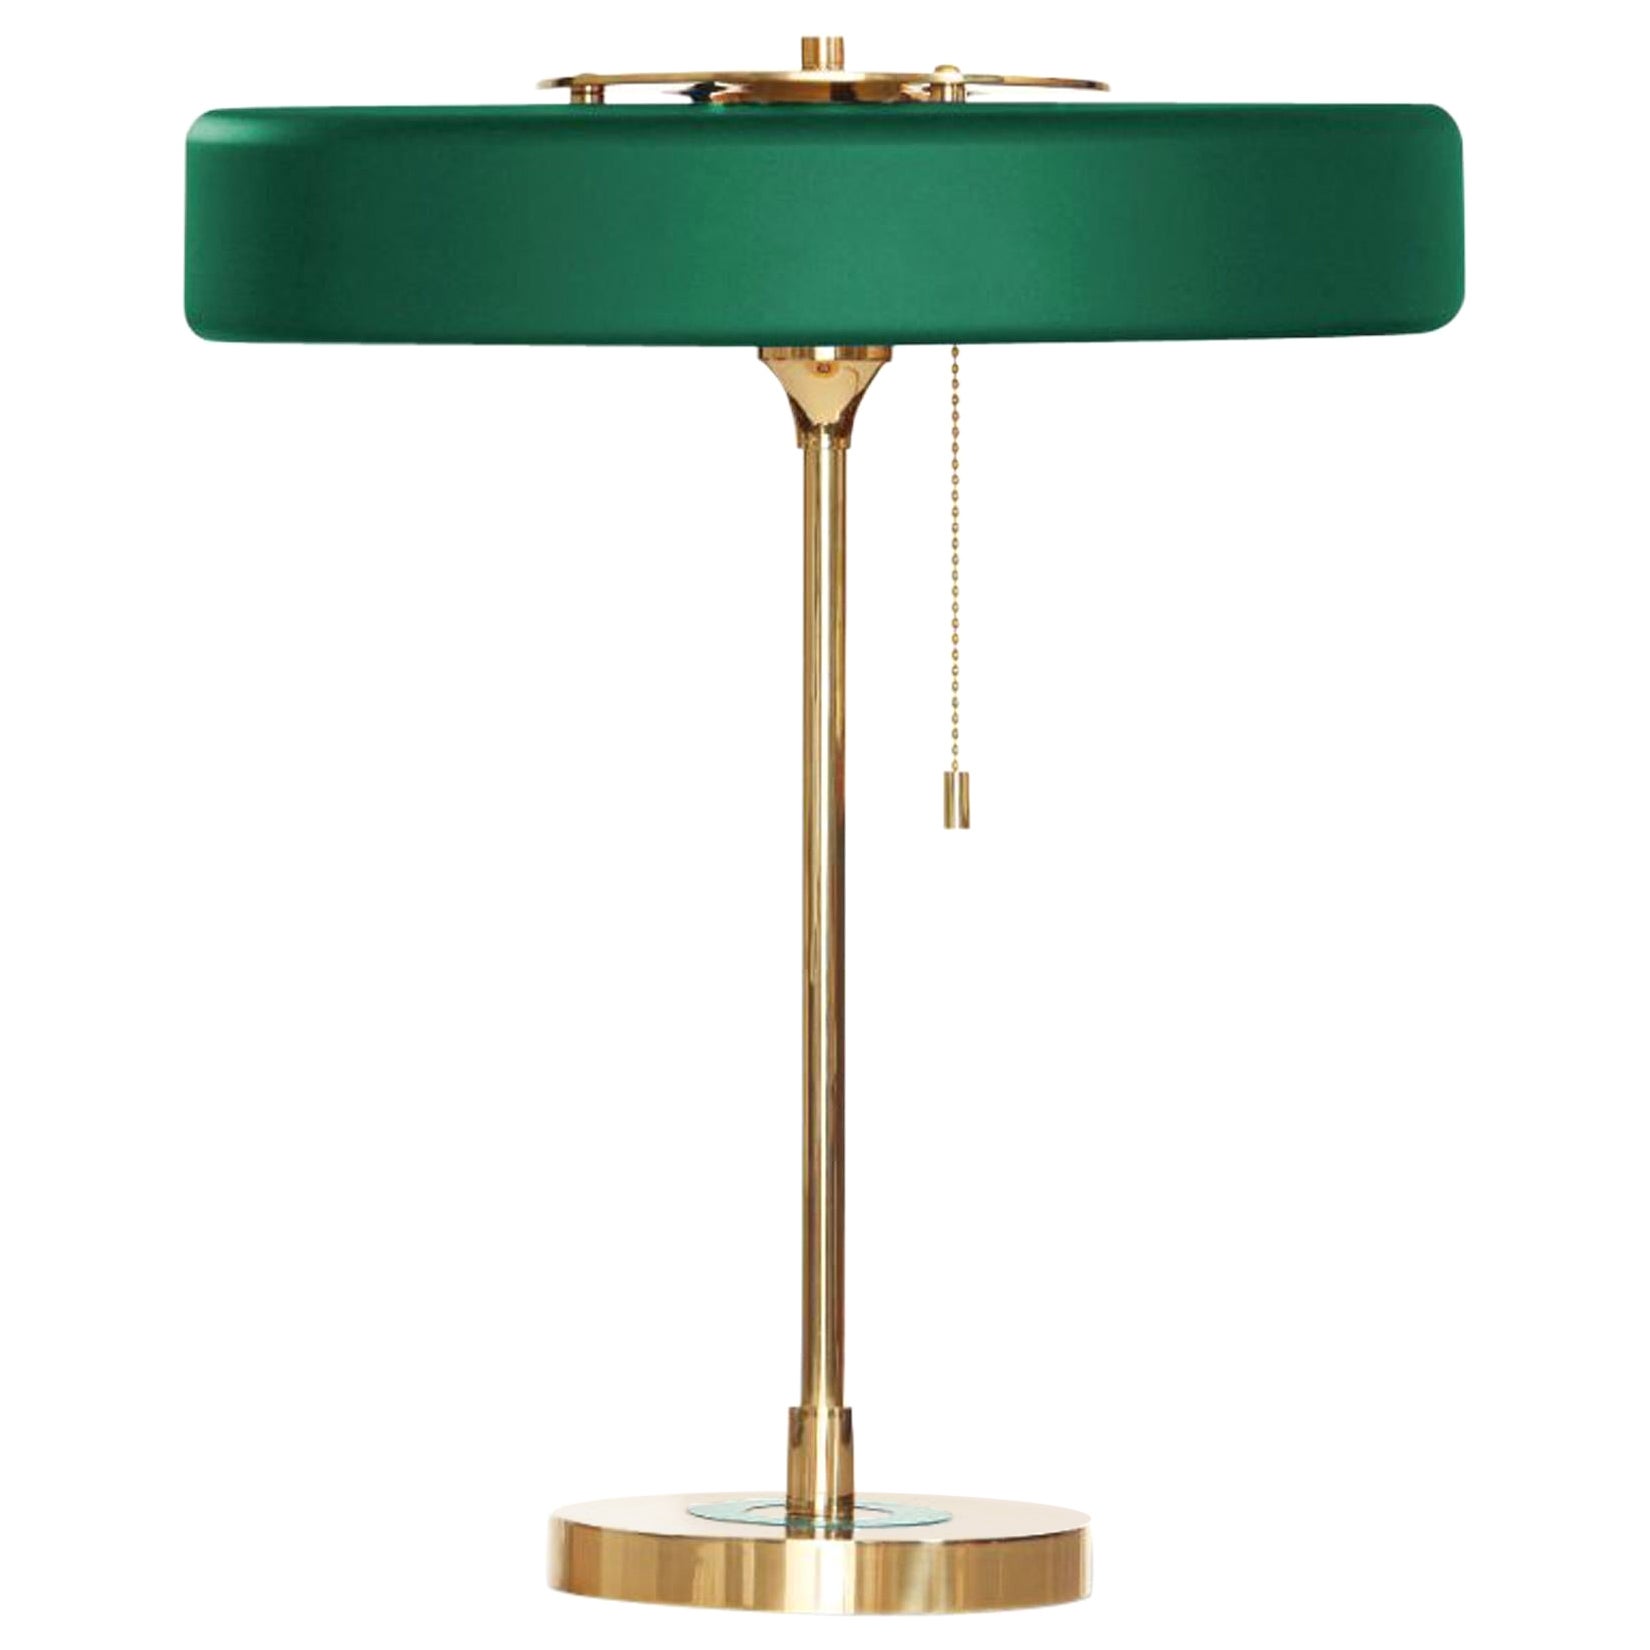 Revolve Table Lamp, Brushed Brass, Green by Bert Frank